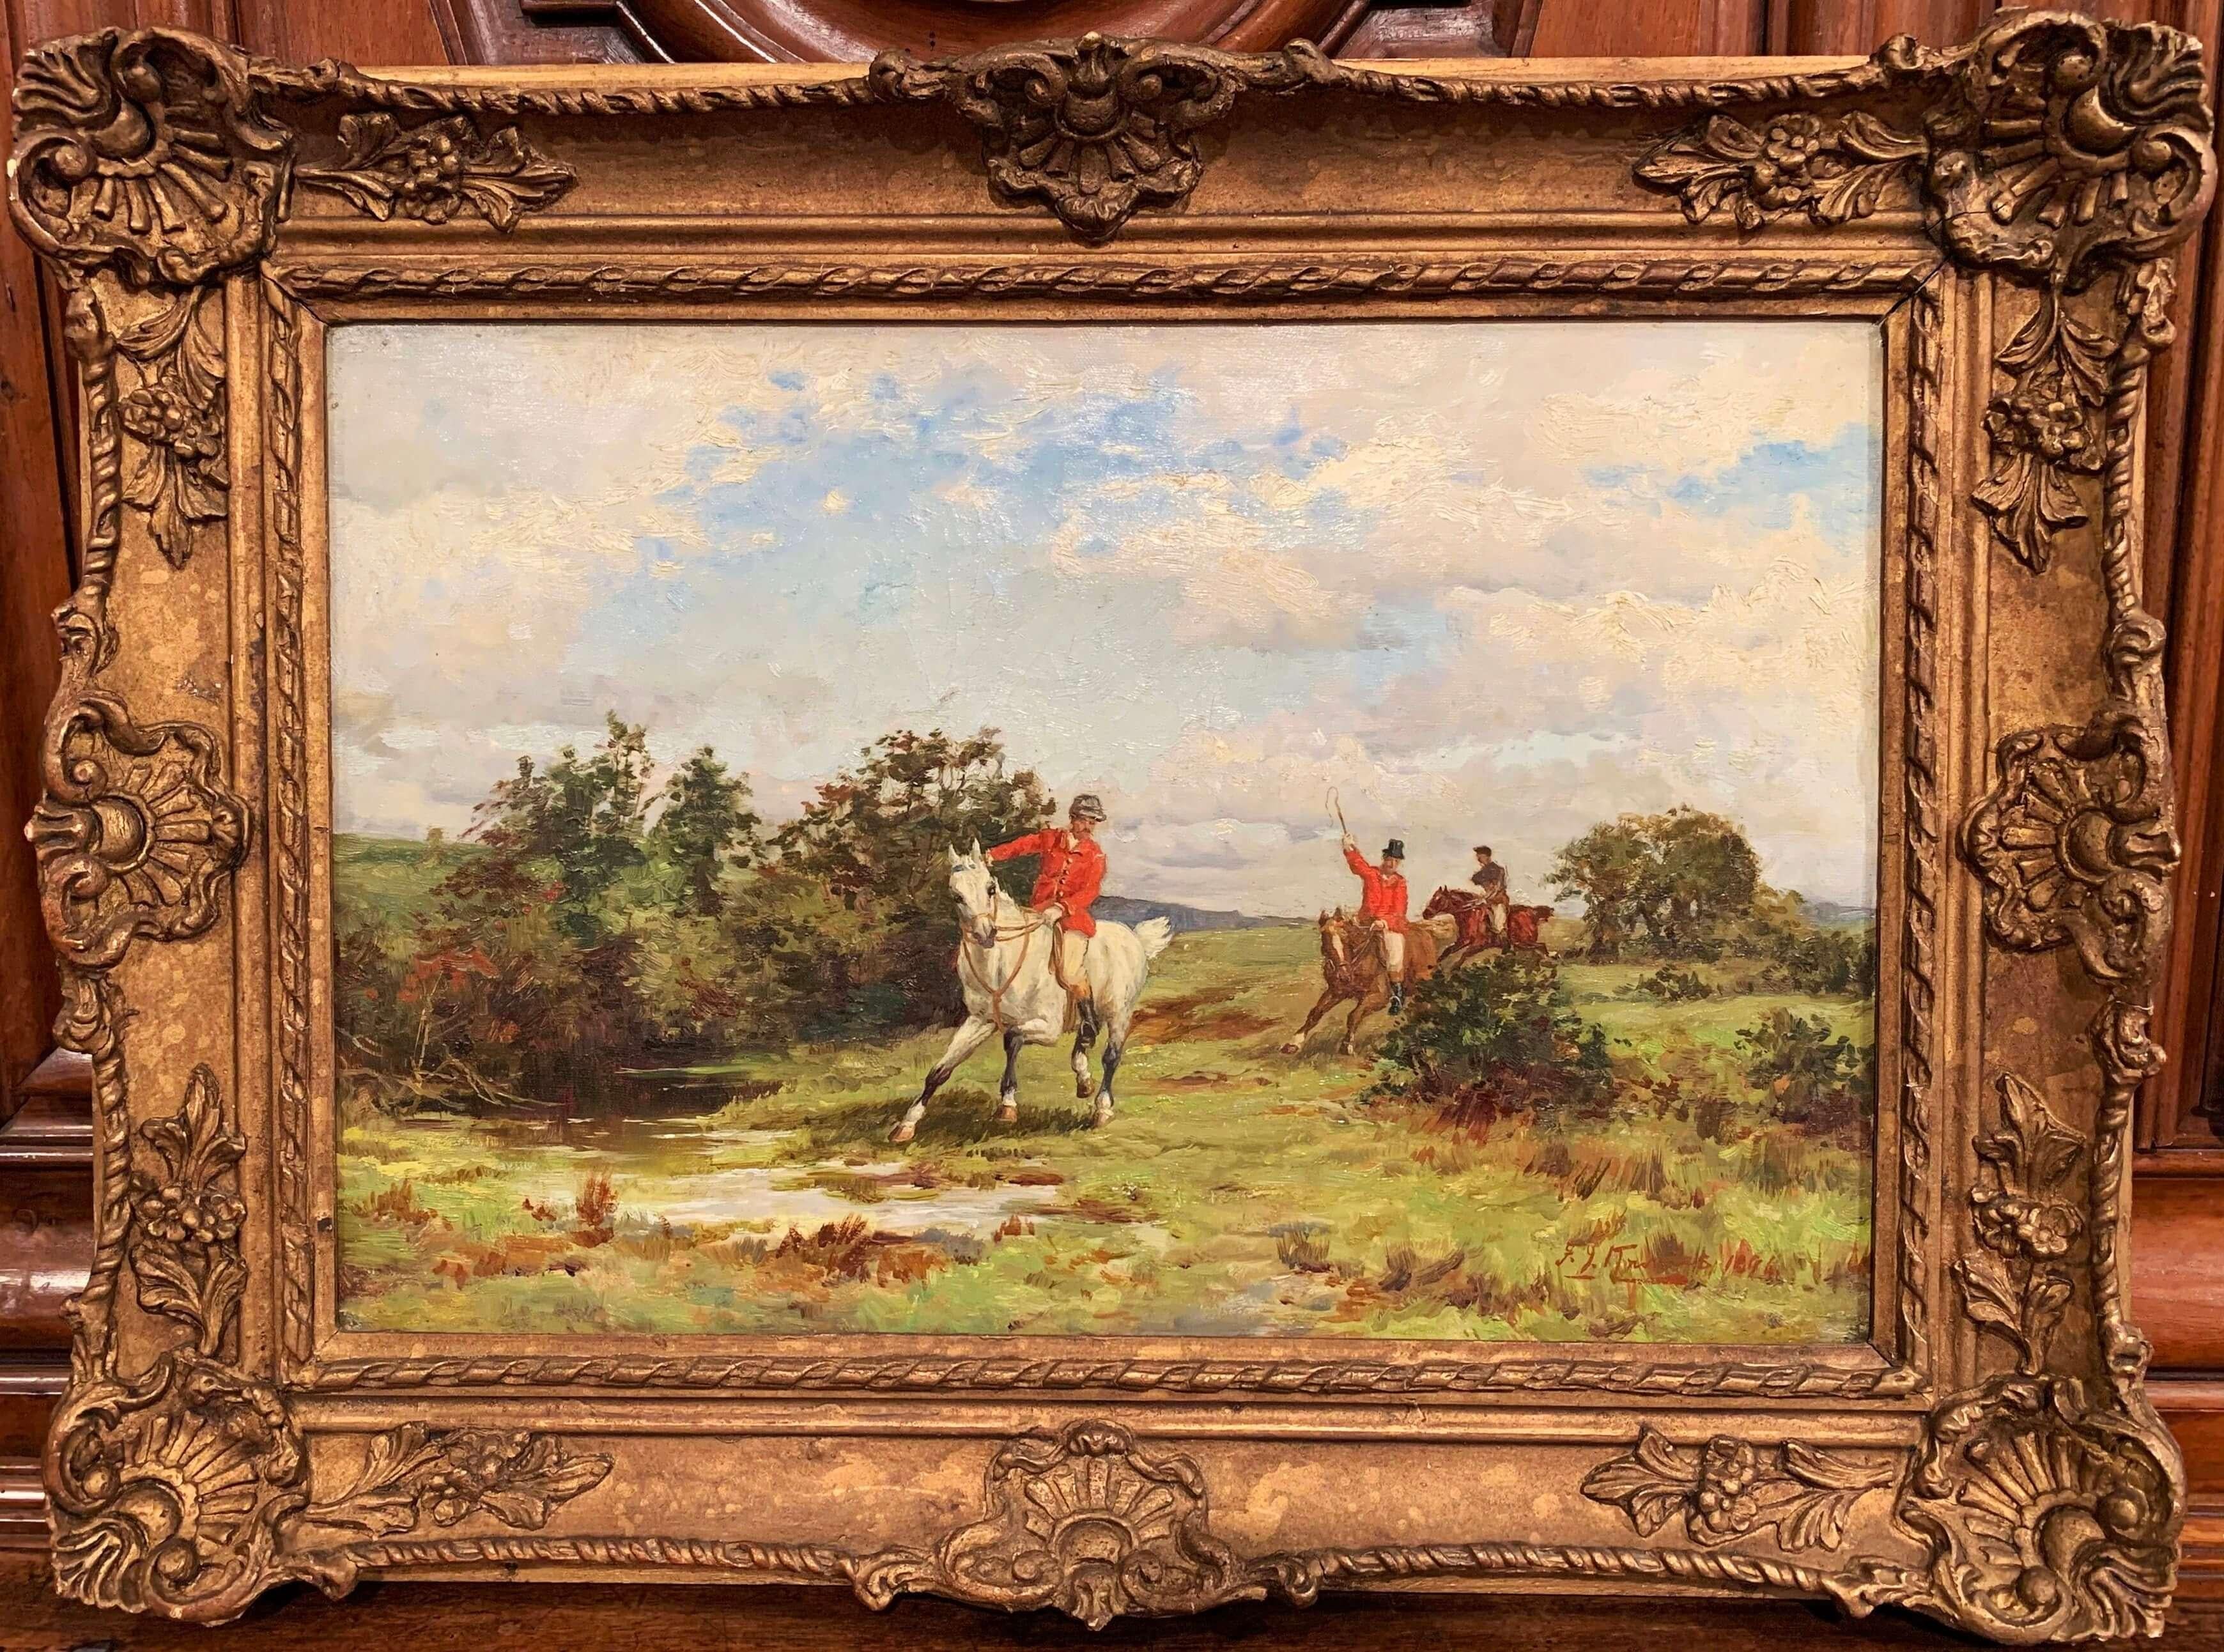 Pair of 19th Century English Hunt Scenes in Carved Frames Signed F. J. Knowles 1